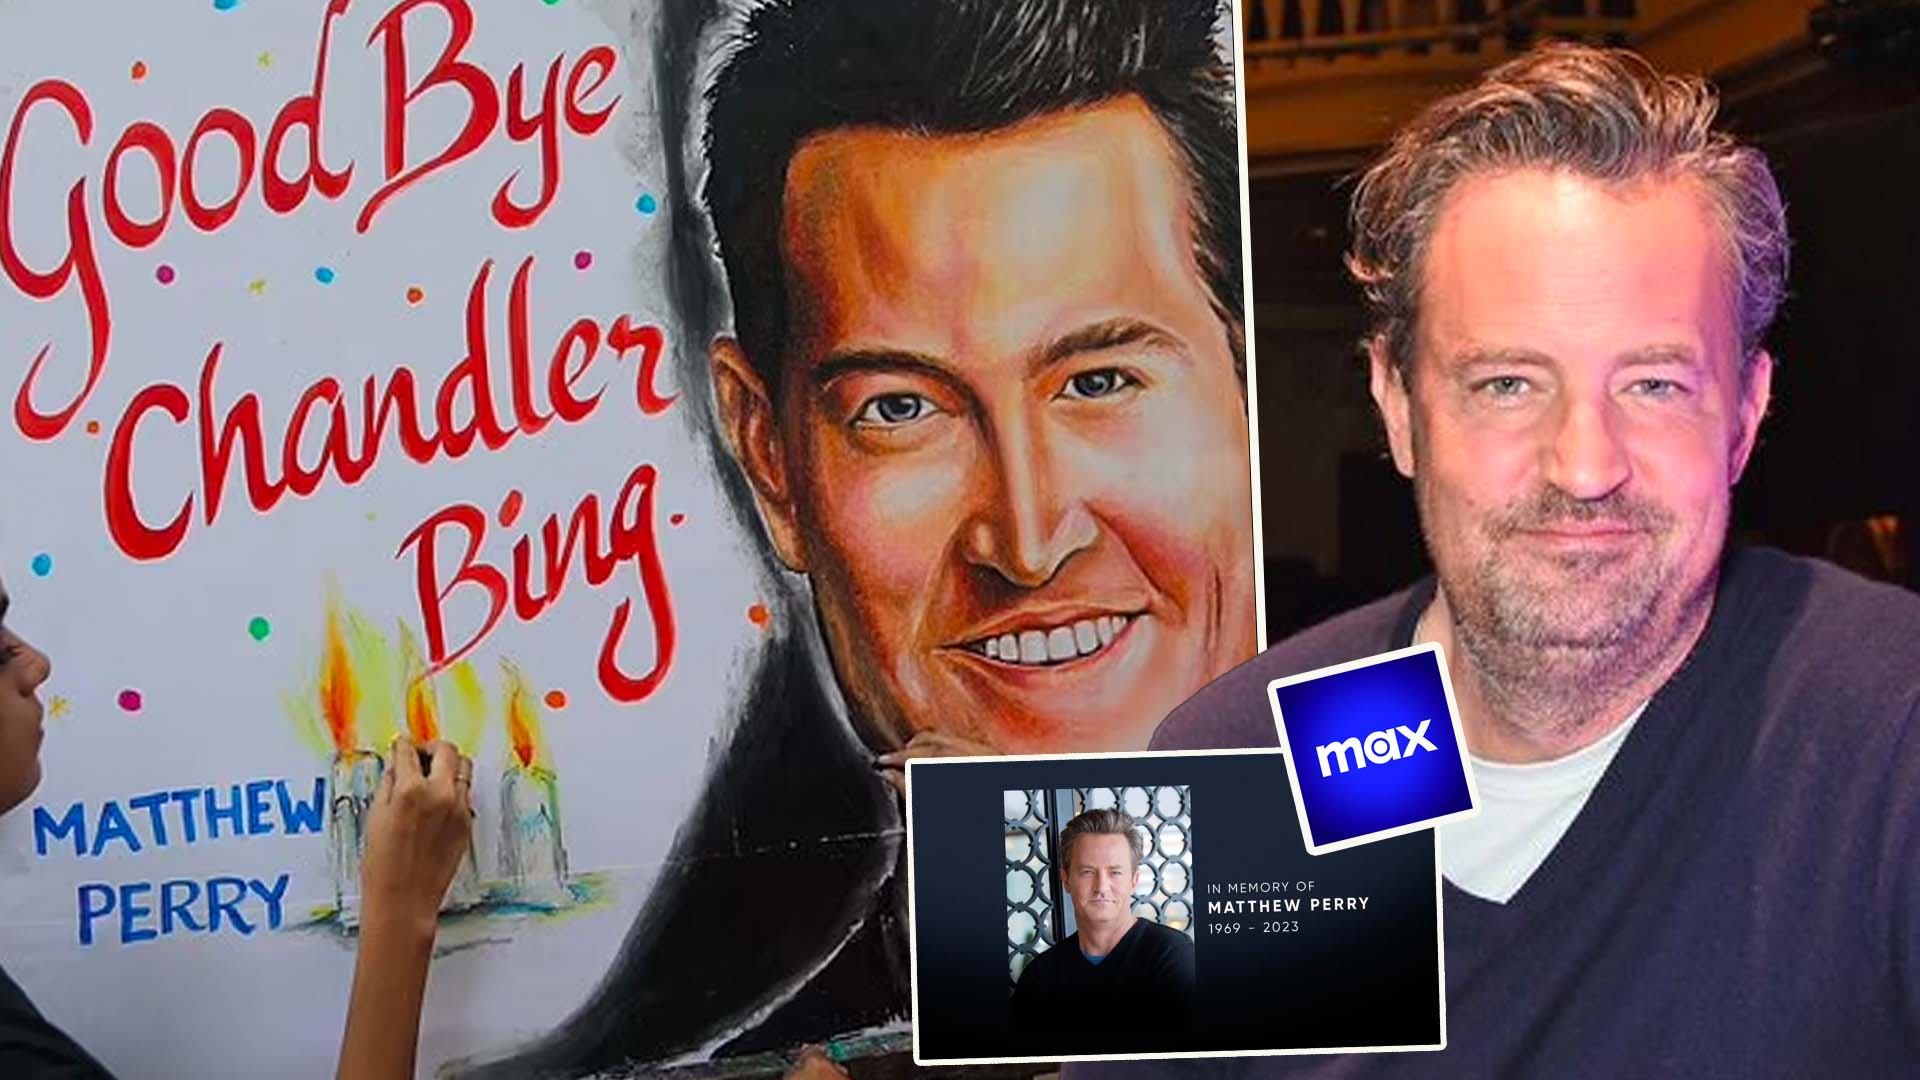 MAX Adds Tribute Card To Matthew Perry: Fans Leave Flowers Outside Iconic Hotel